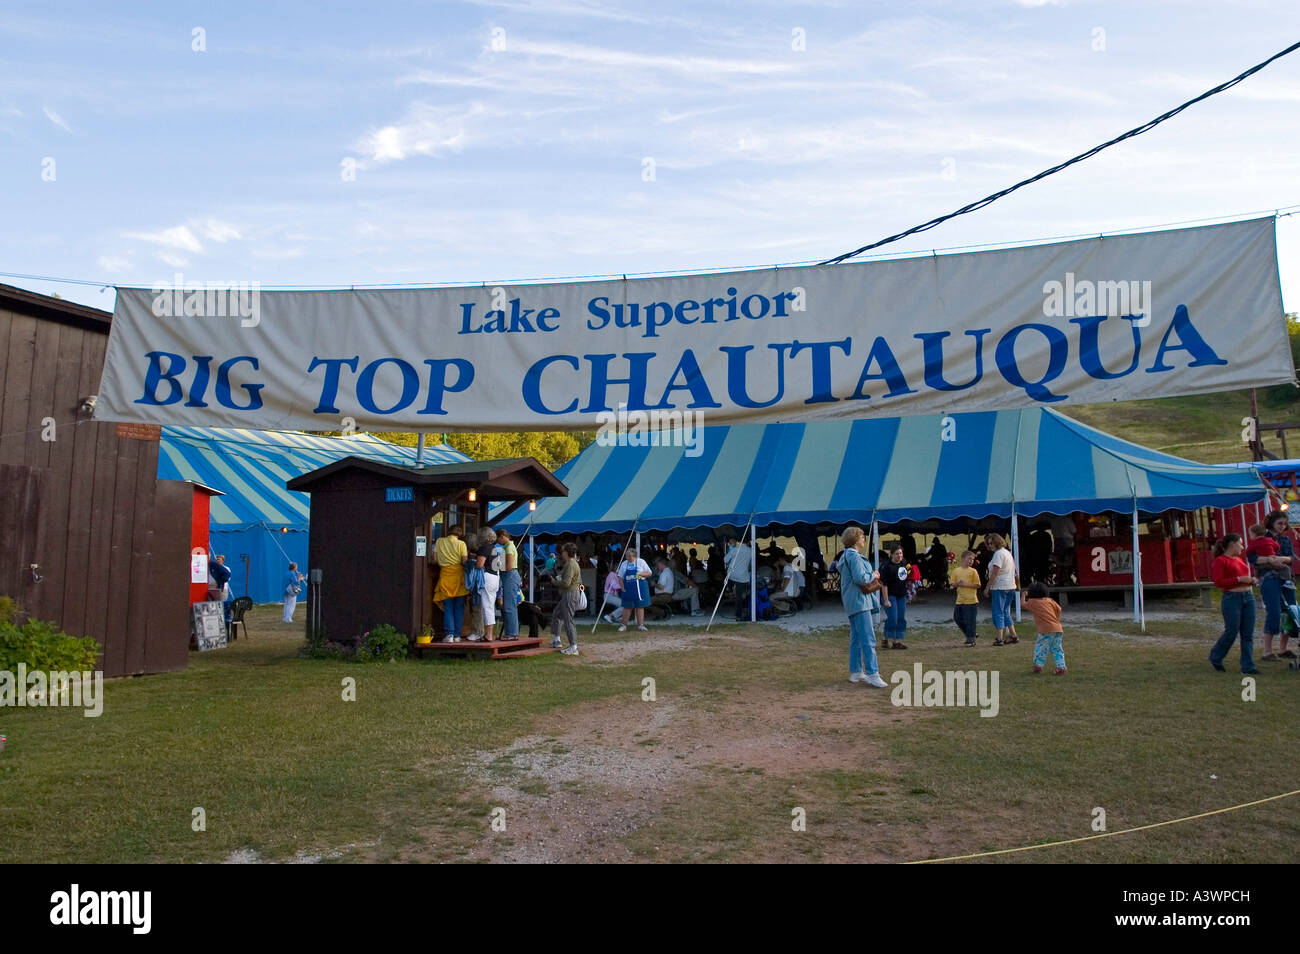 The Big Top Chautauqua tents and grounds near Bayfield Wisconsin Stock